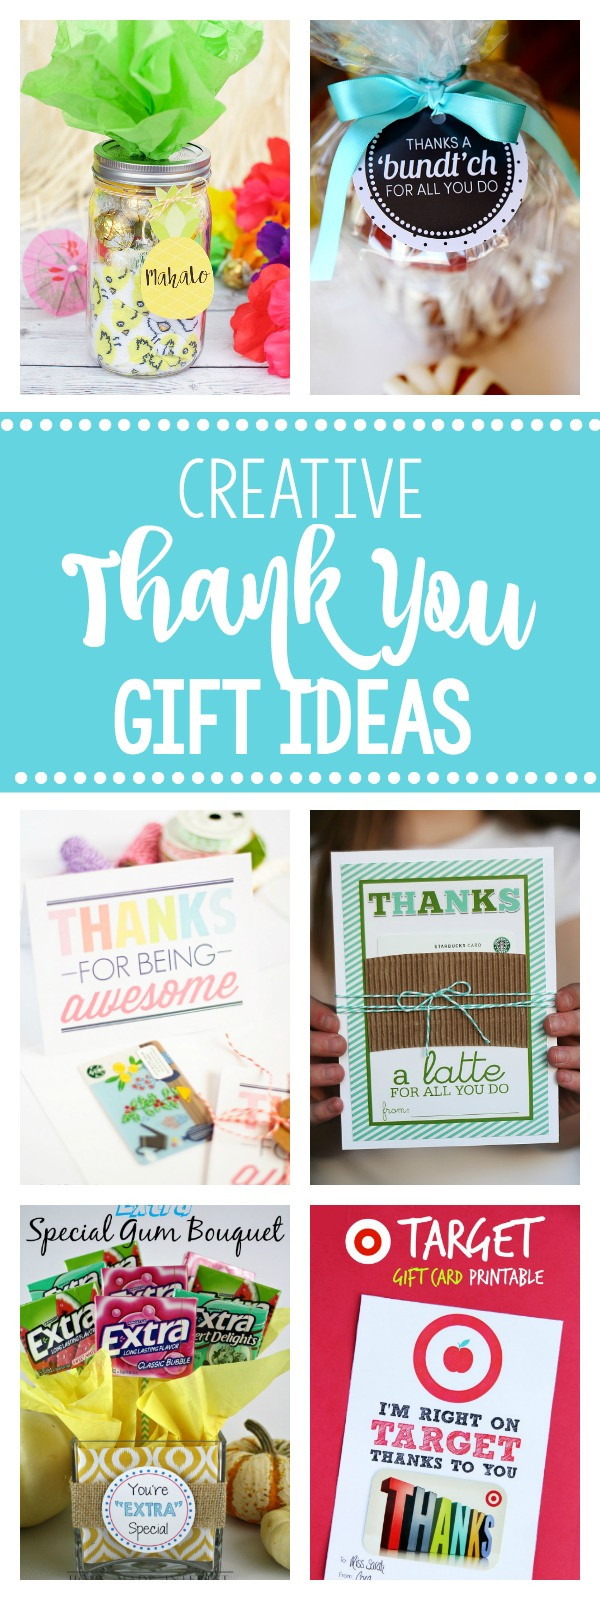 Good Thank You Gift Ideas
 25 Creative & Unique Thank You Gifts – Fun Squared